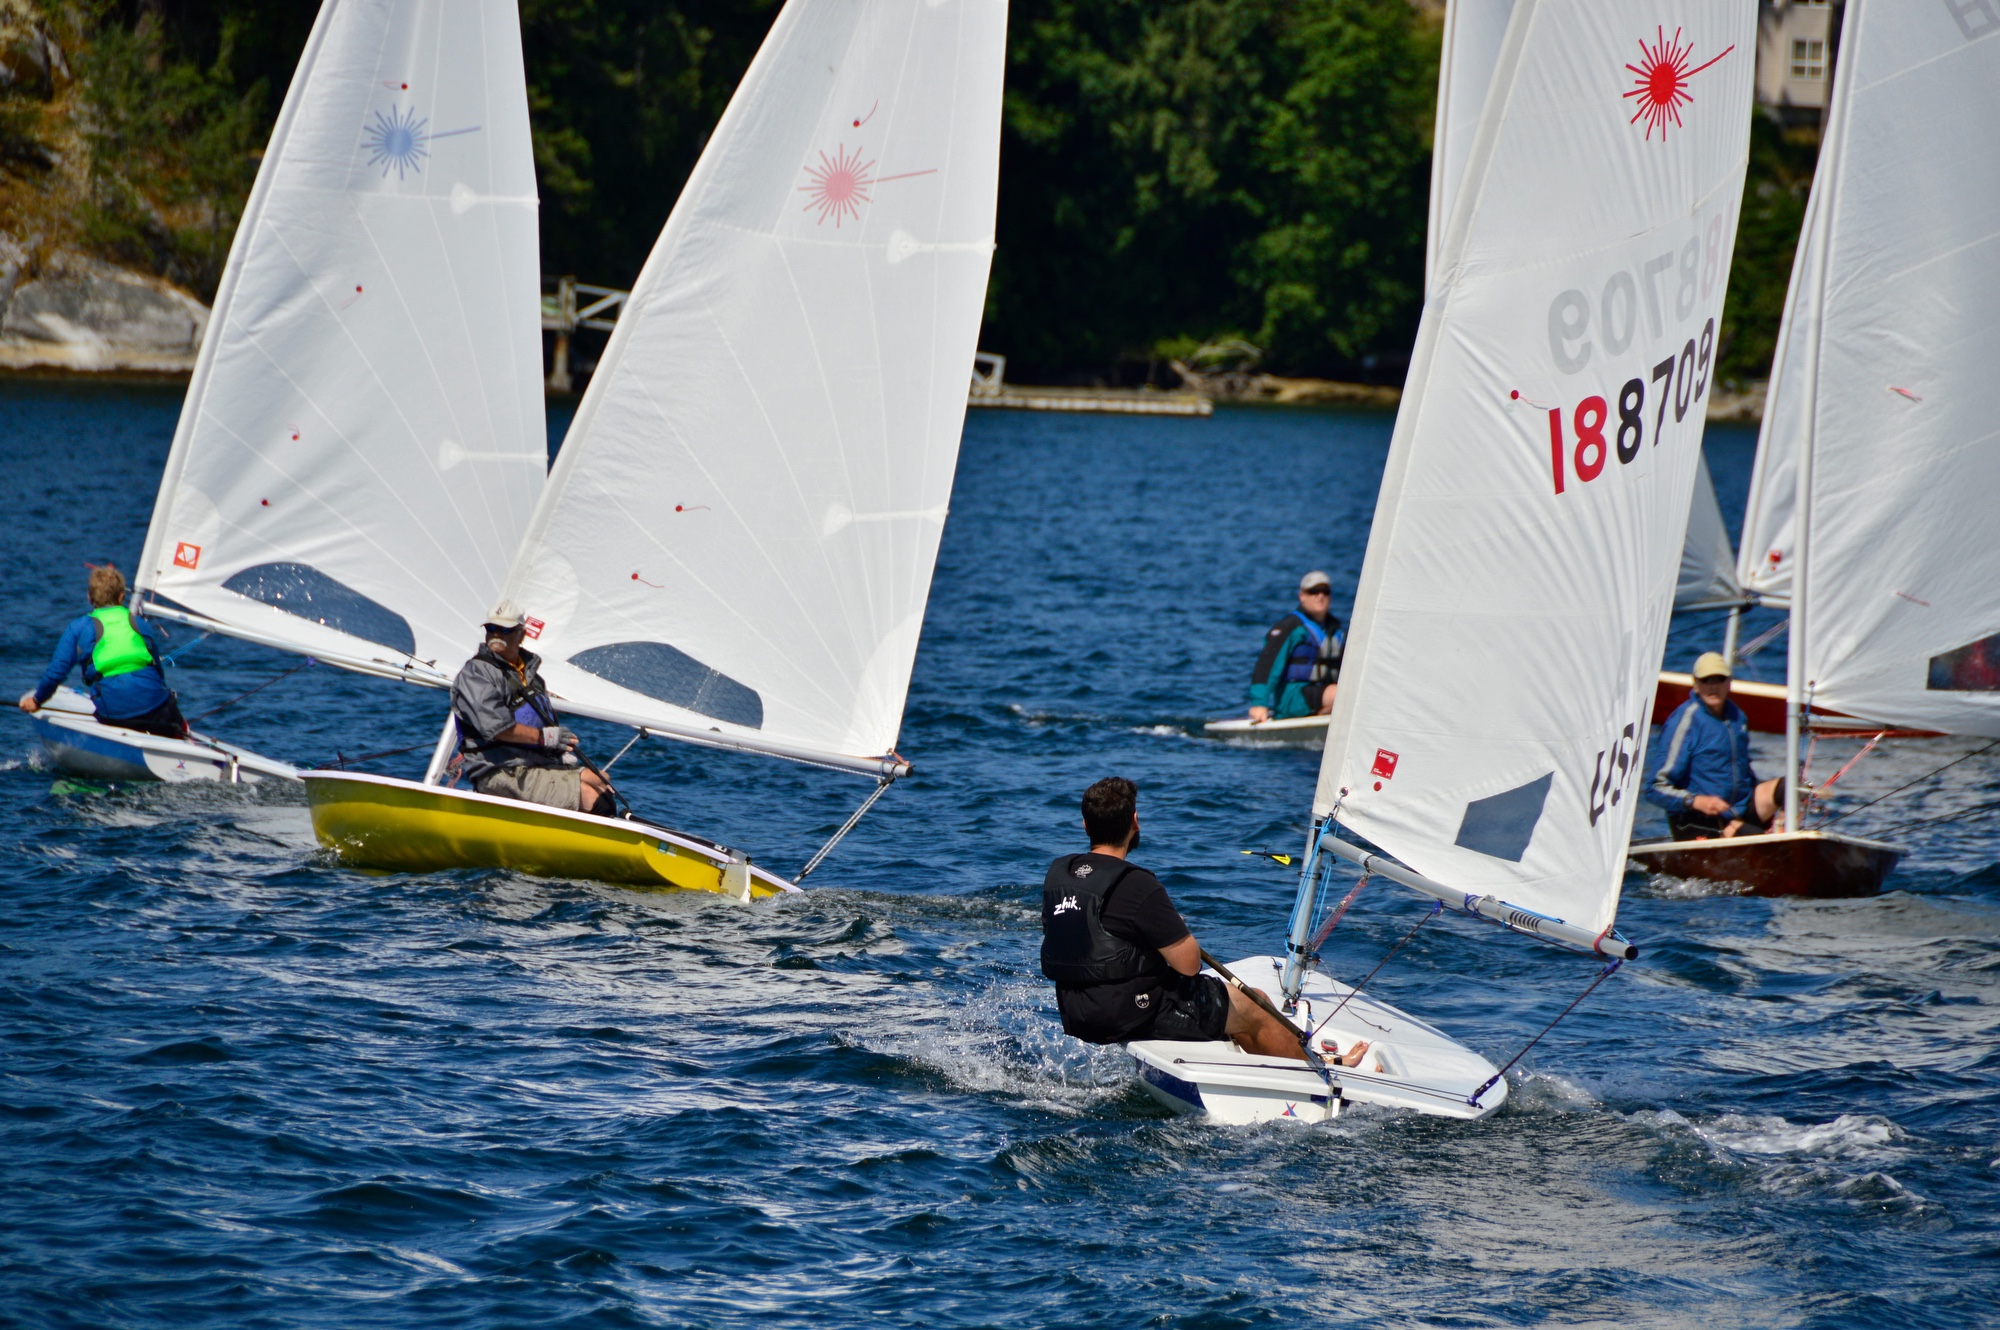 Lasers staging for the start of the race at The 6th Annual Poise Cove Regatta July 16th, 2017